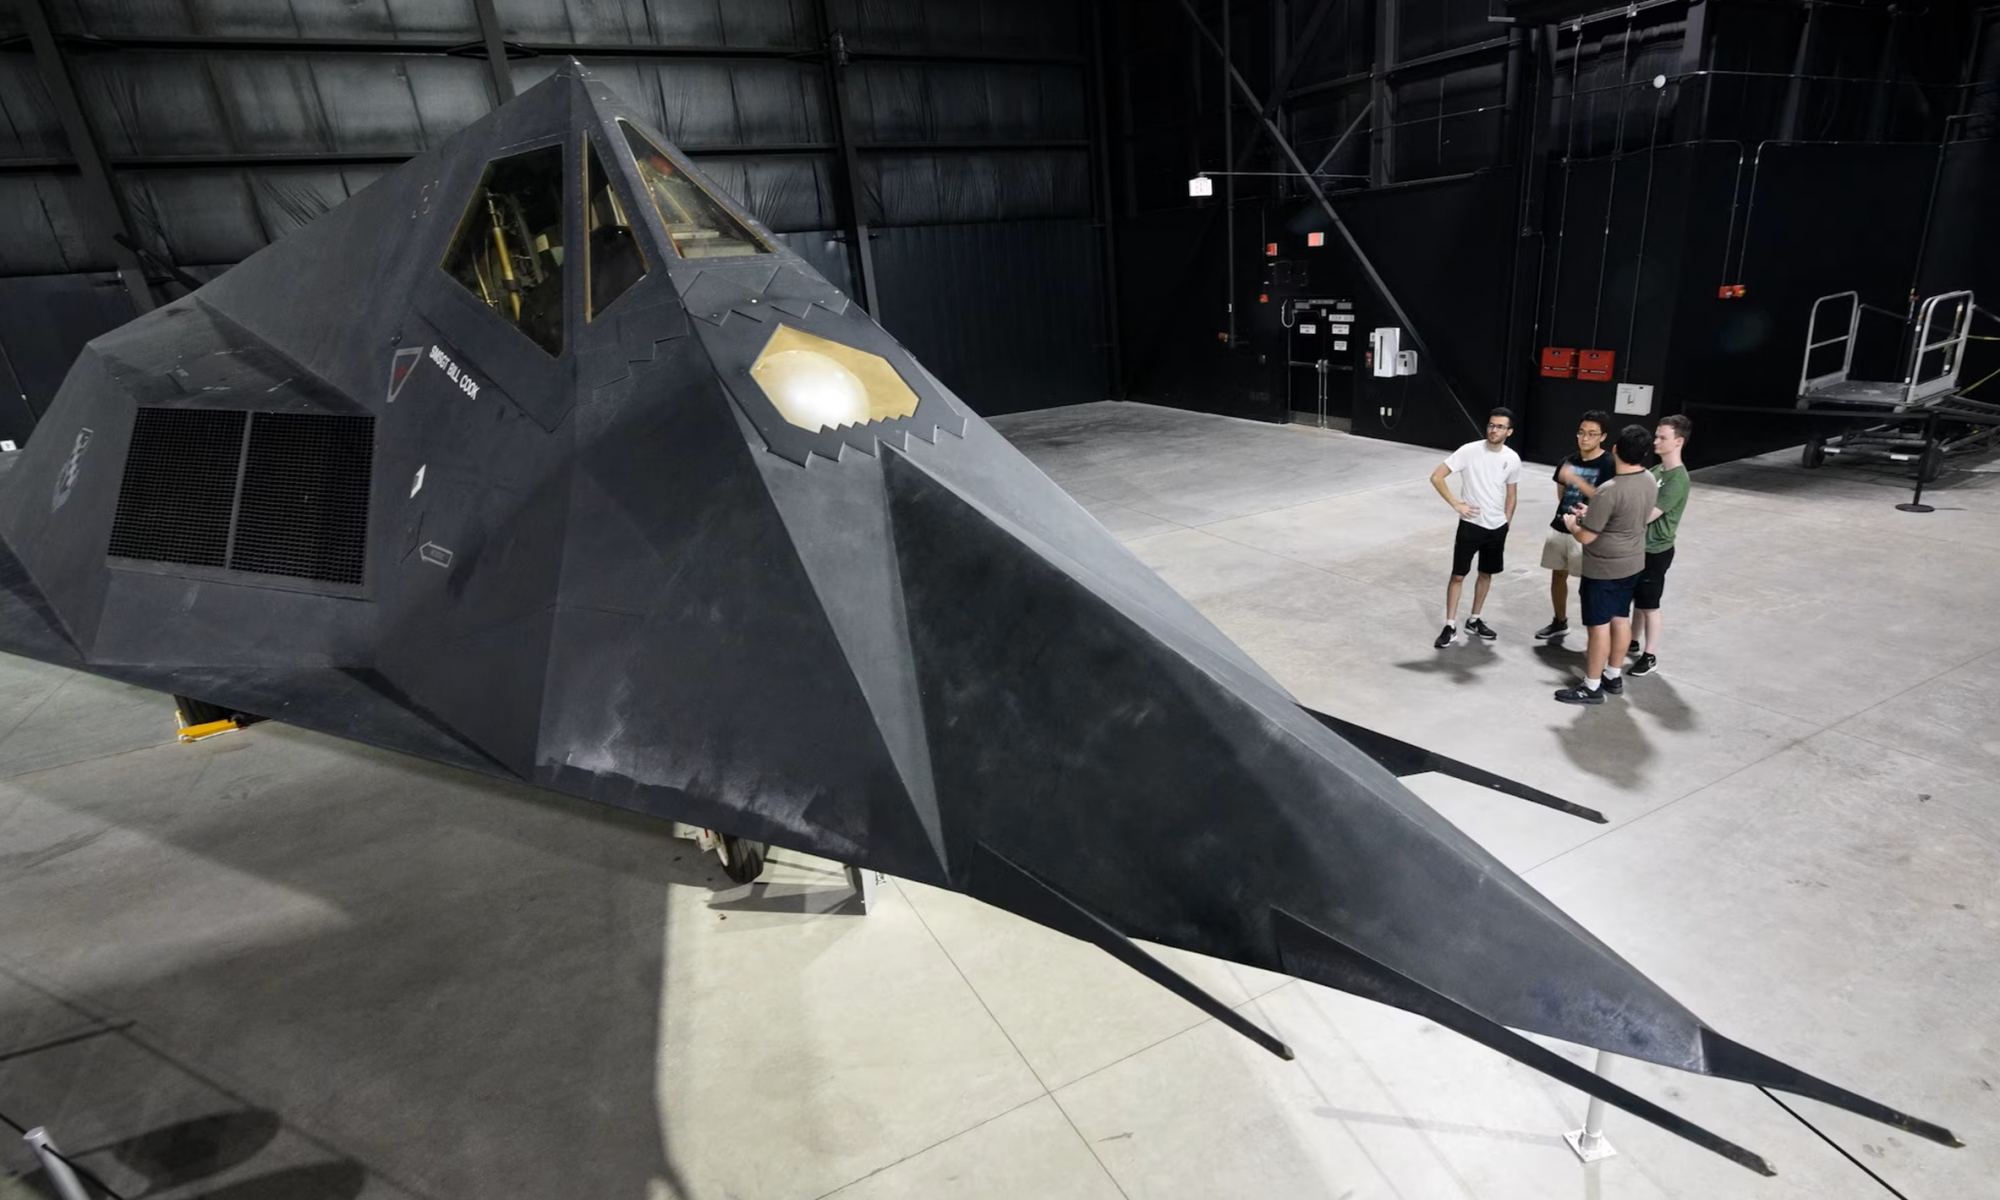 Not a UFO: F-117A Nighthawk stealth fighter on exhibit